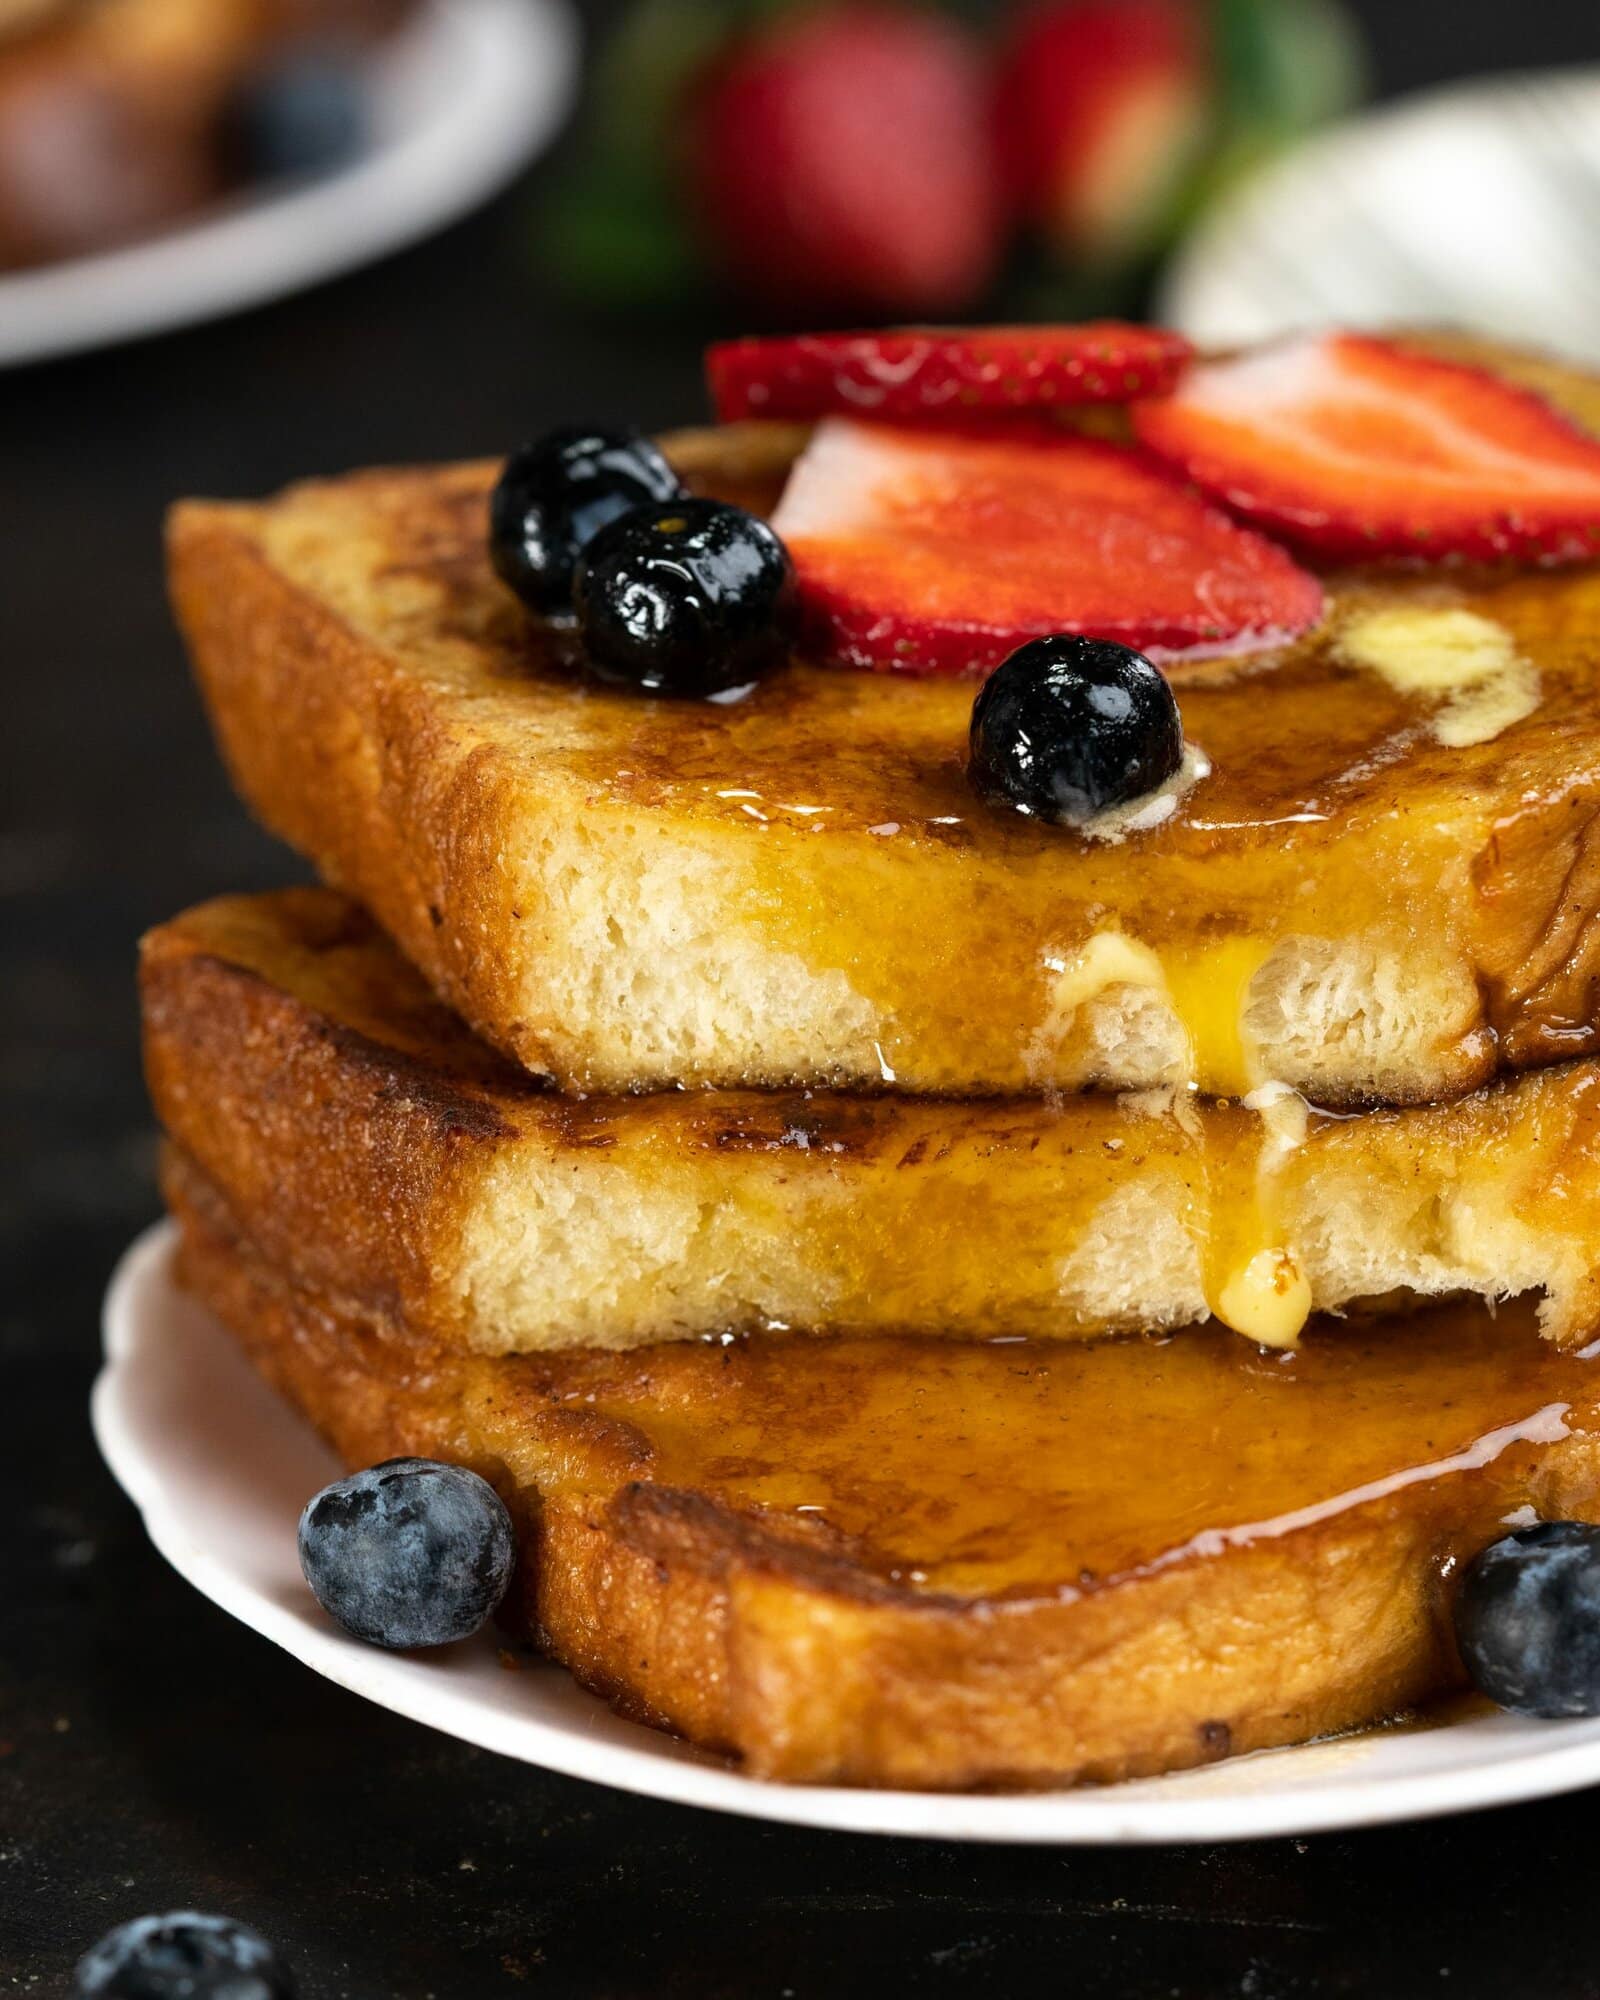 maple syrup dripping down the sides of a stack of brioche bread toasts. it is adorned with berries.